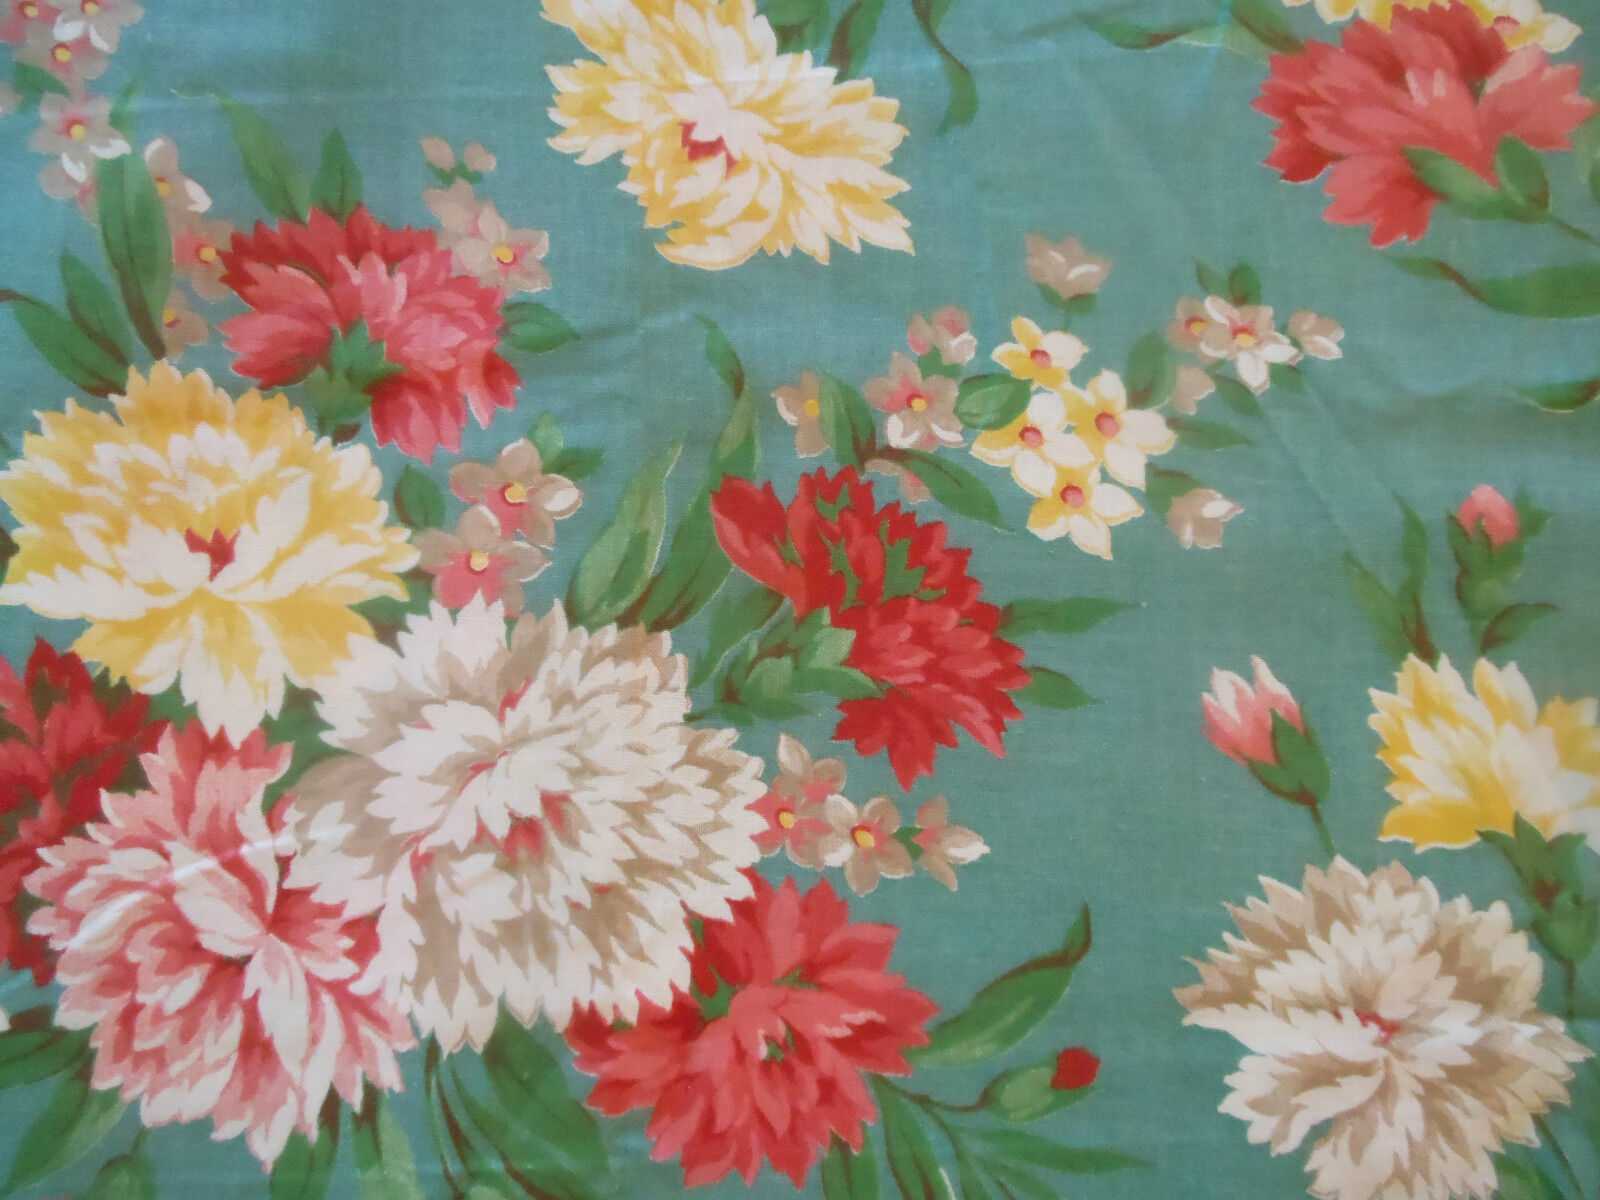 Vintage Floral Carnation 30's - 40's Cotton Fabric ~ Coral Pink Yellow Aqua Teal